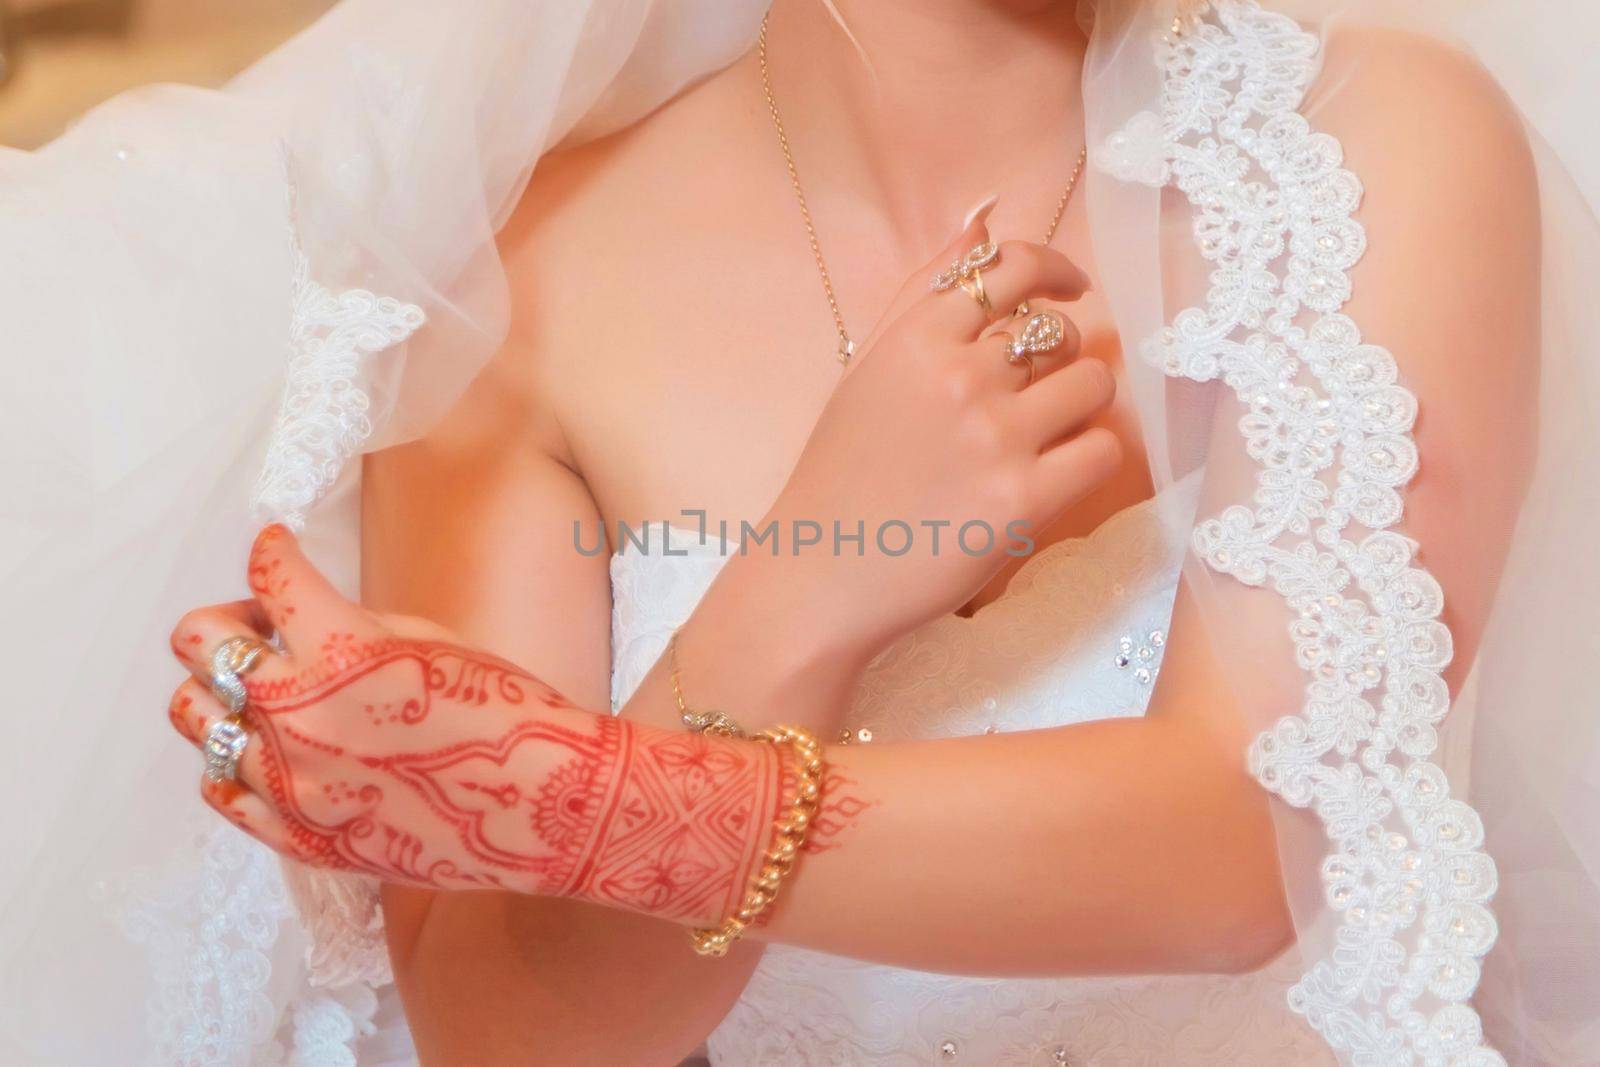 The bride holds the fat. The bride has handset, rings and bracelets. Elegant Wedding Ring with Beautiful Henna of Bride Hand